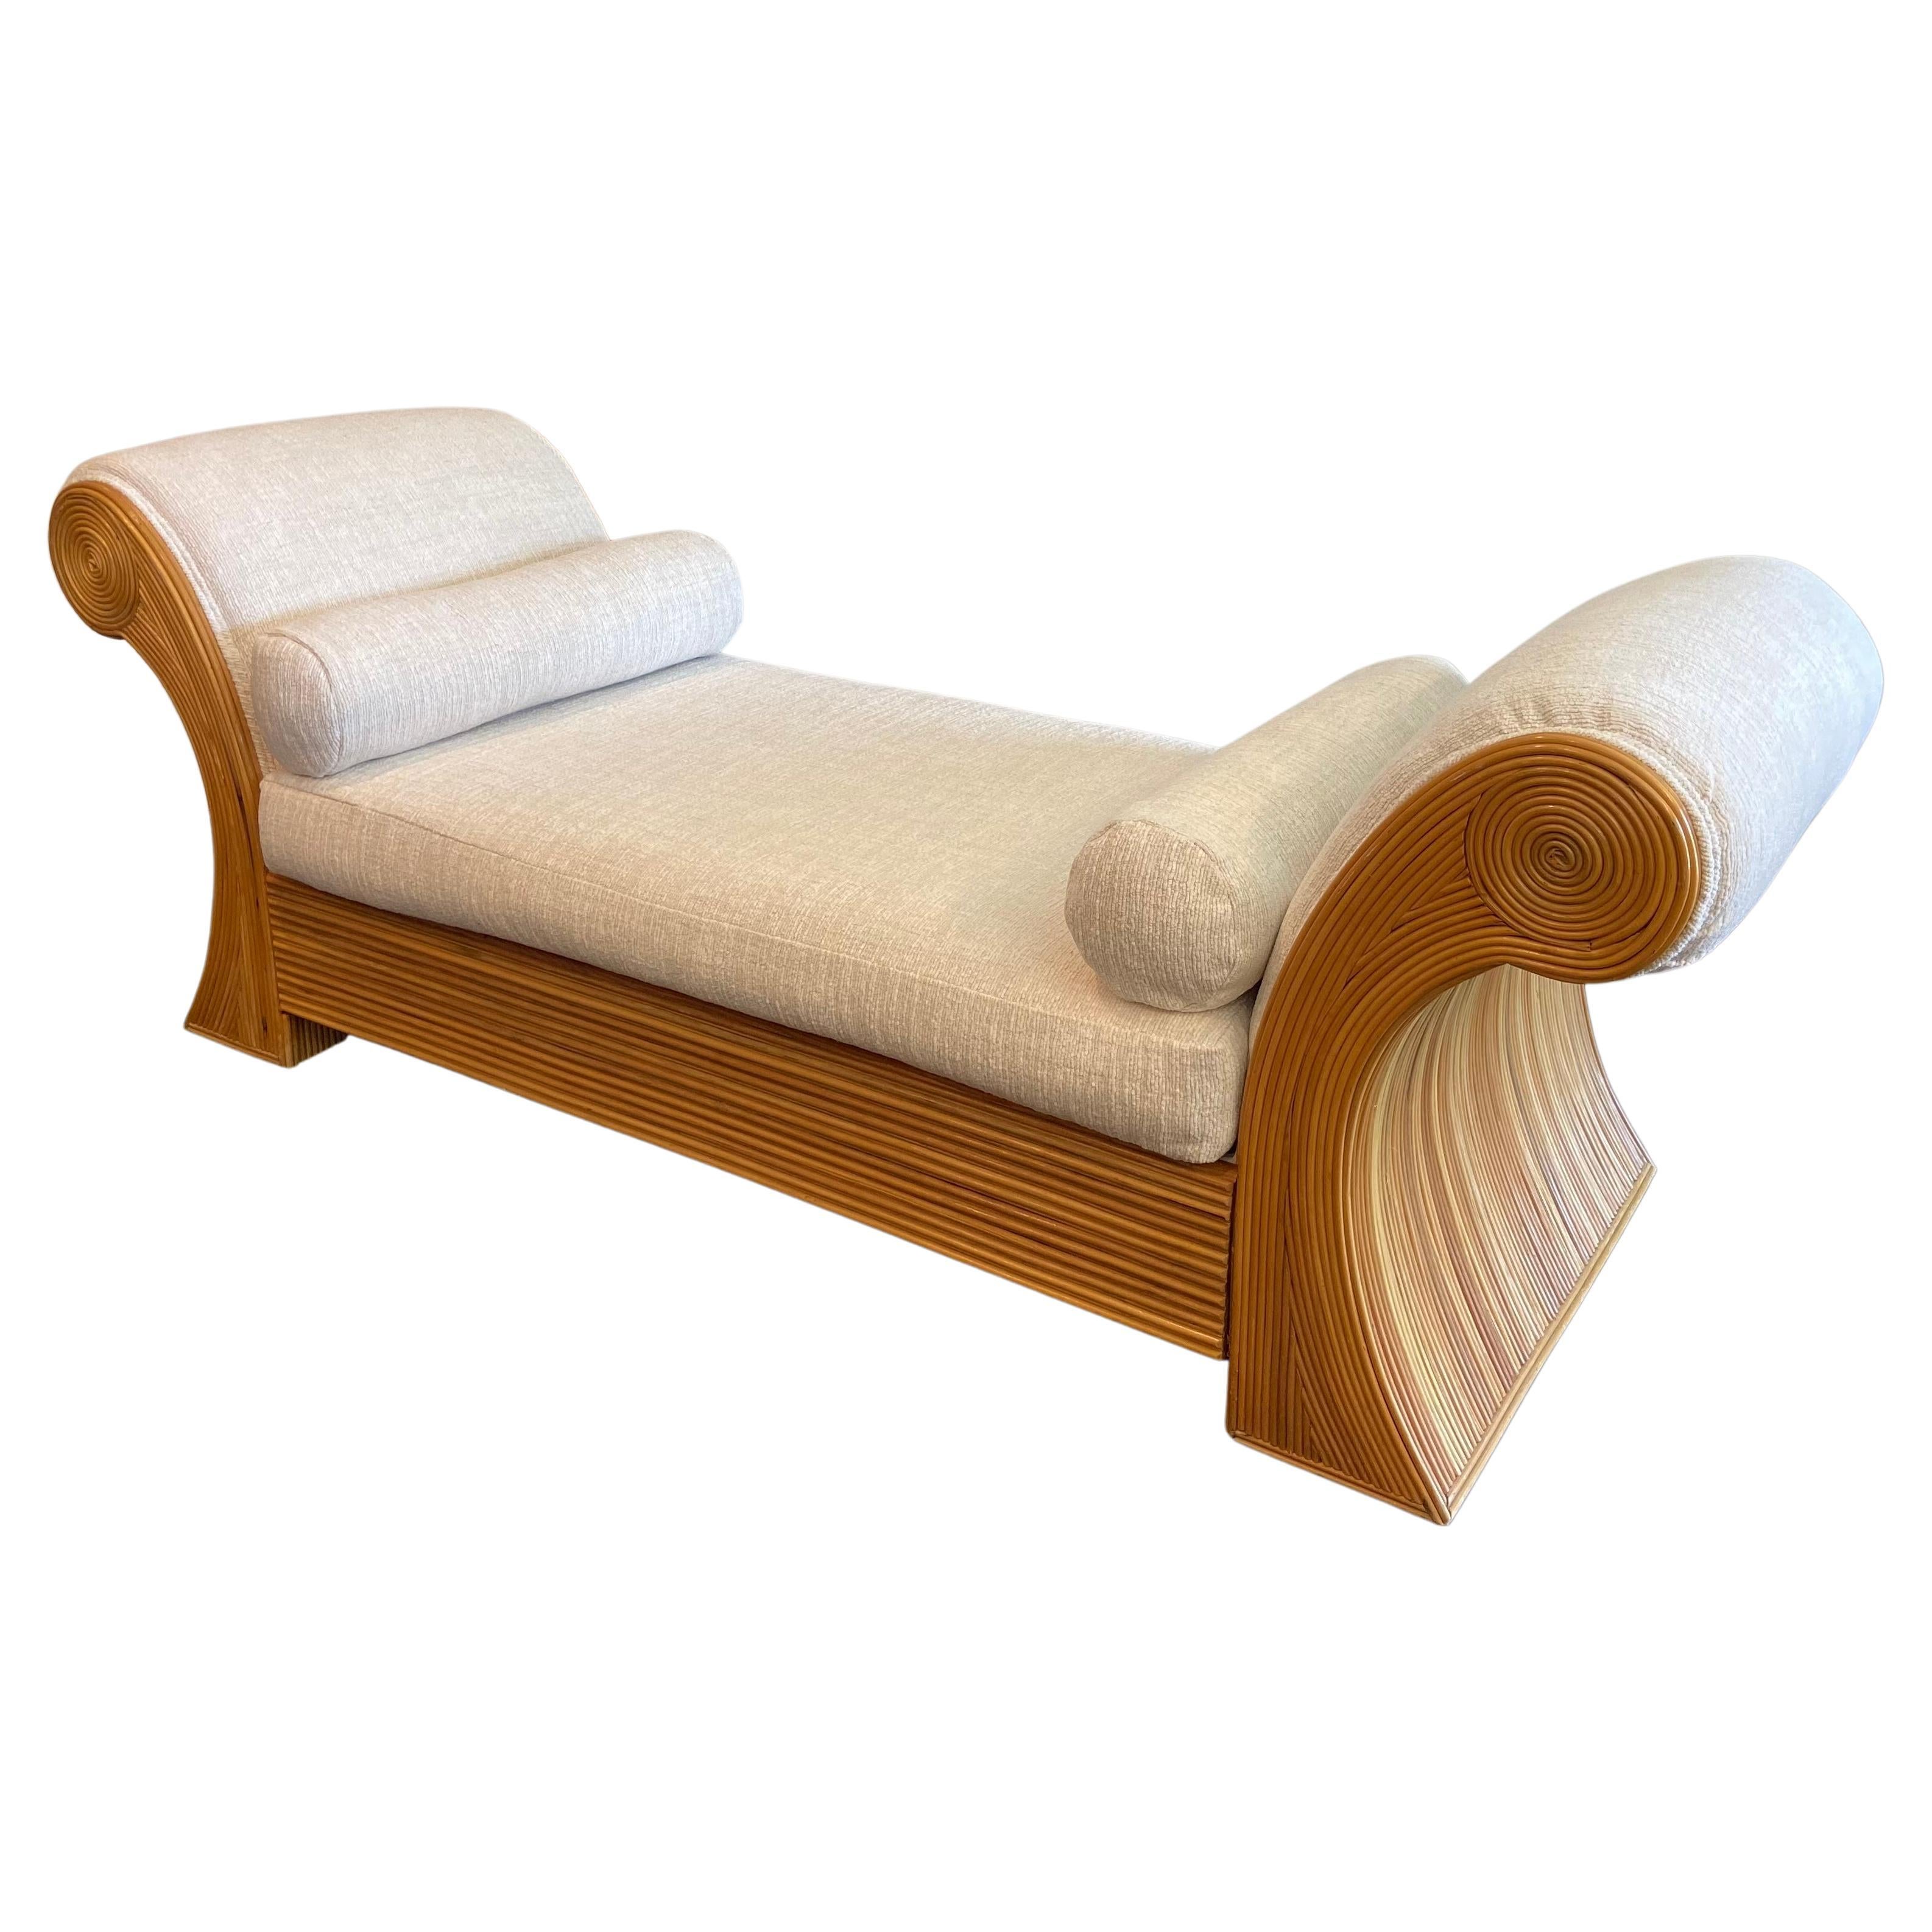 Adrian Pearsall For Comfort Designs Pencil Reed Daybed